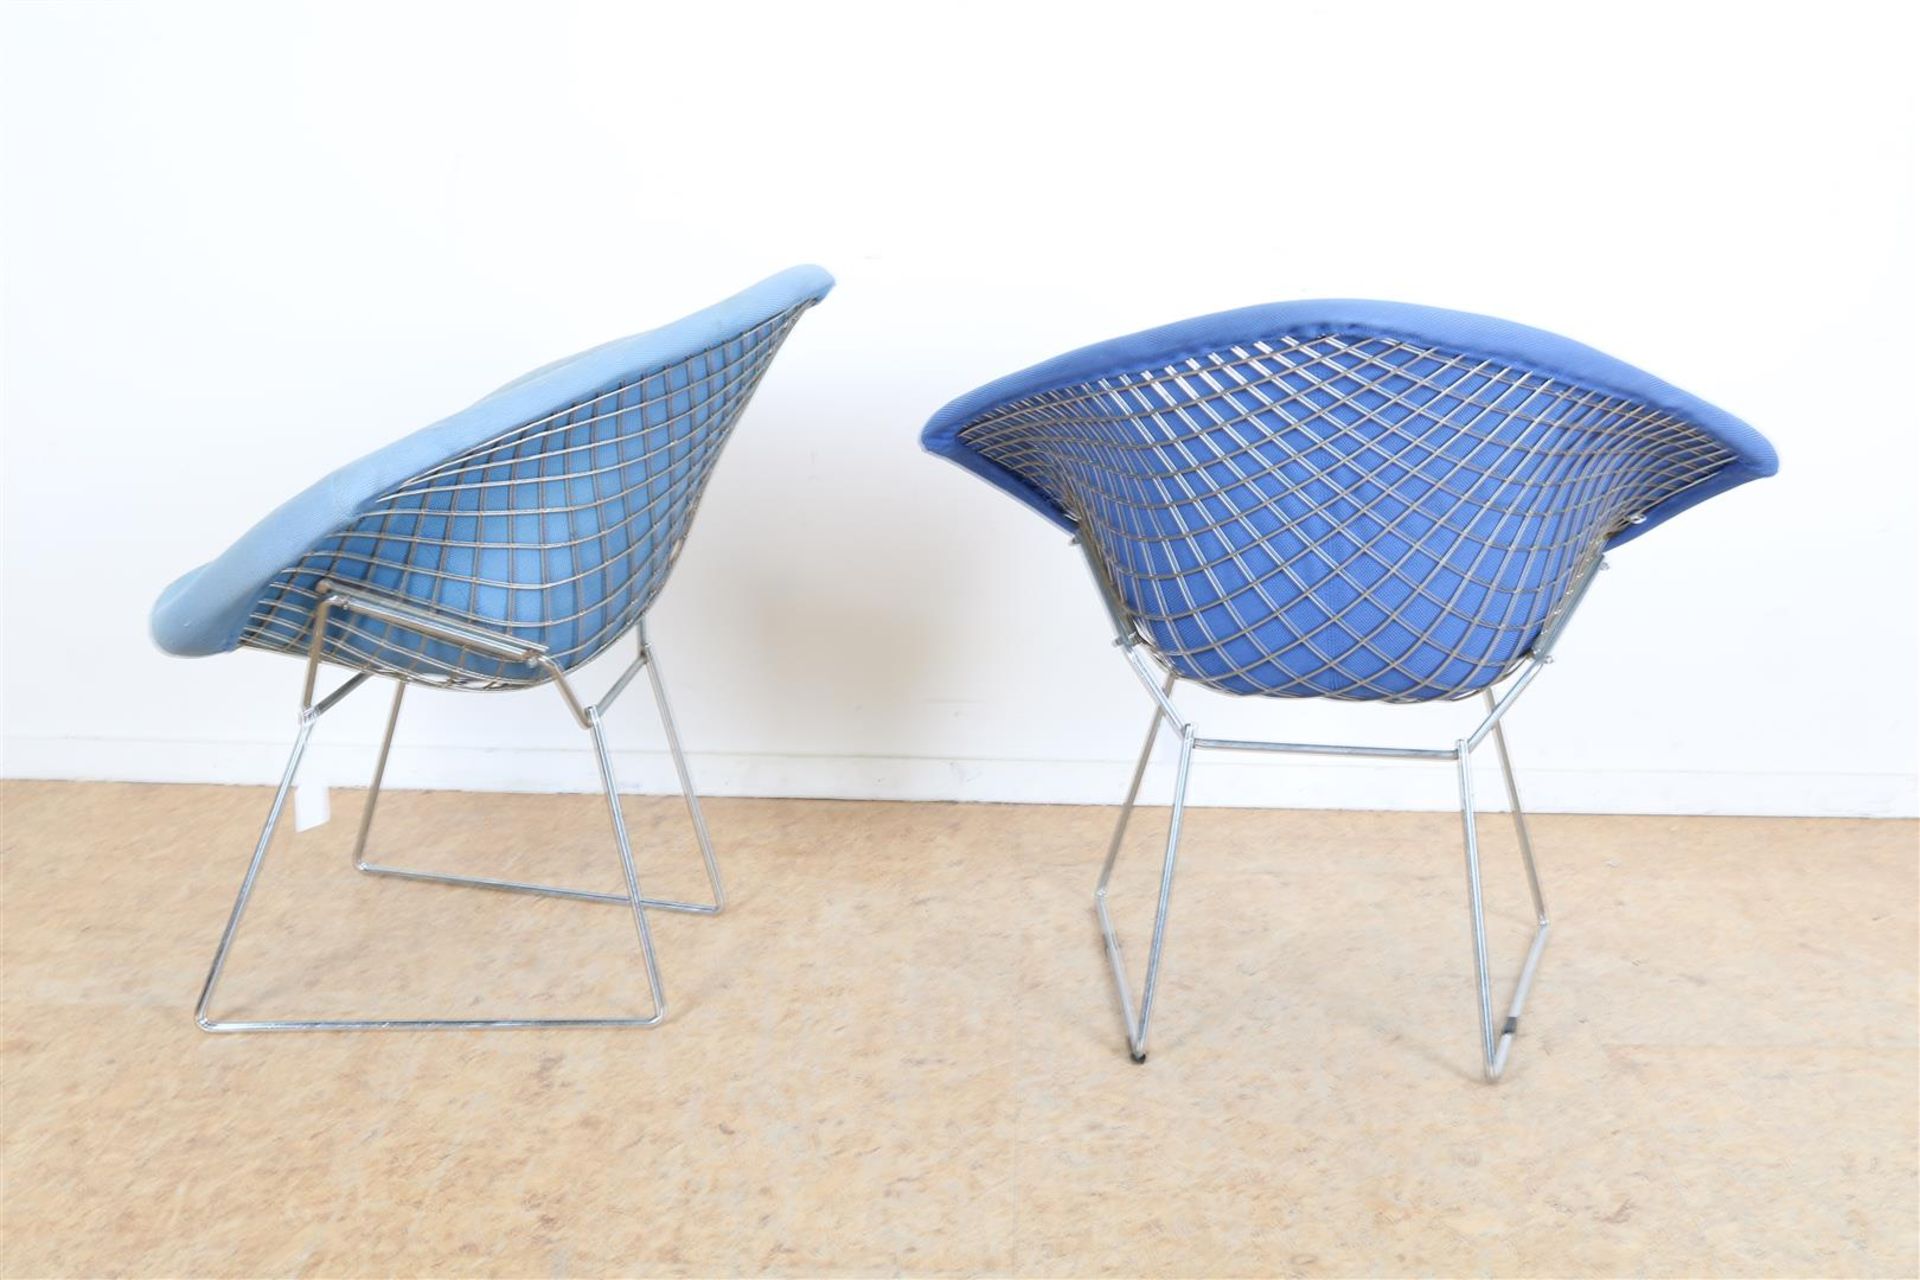 Set of wire steel design chairs with blue upholstery, designed in 1952 by Harry Bertoia for Knoll. - Image 3 of 5